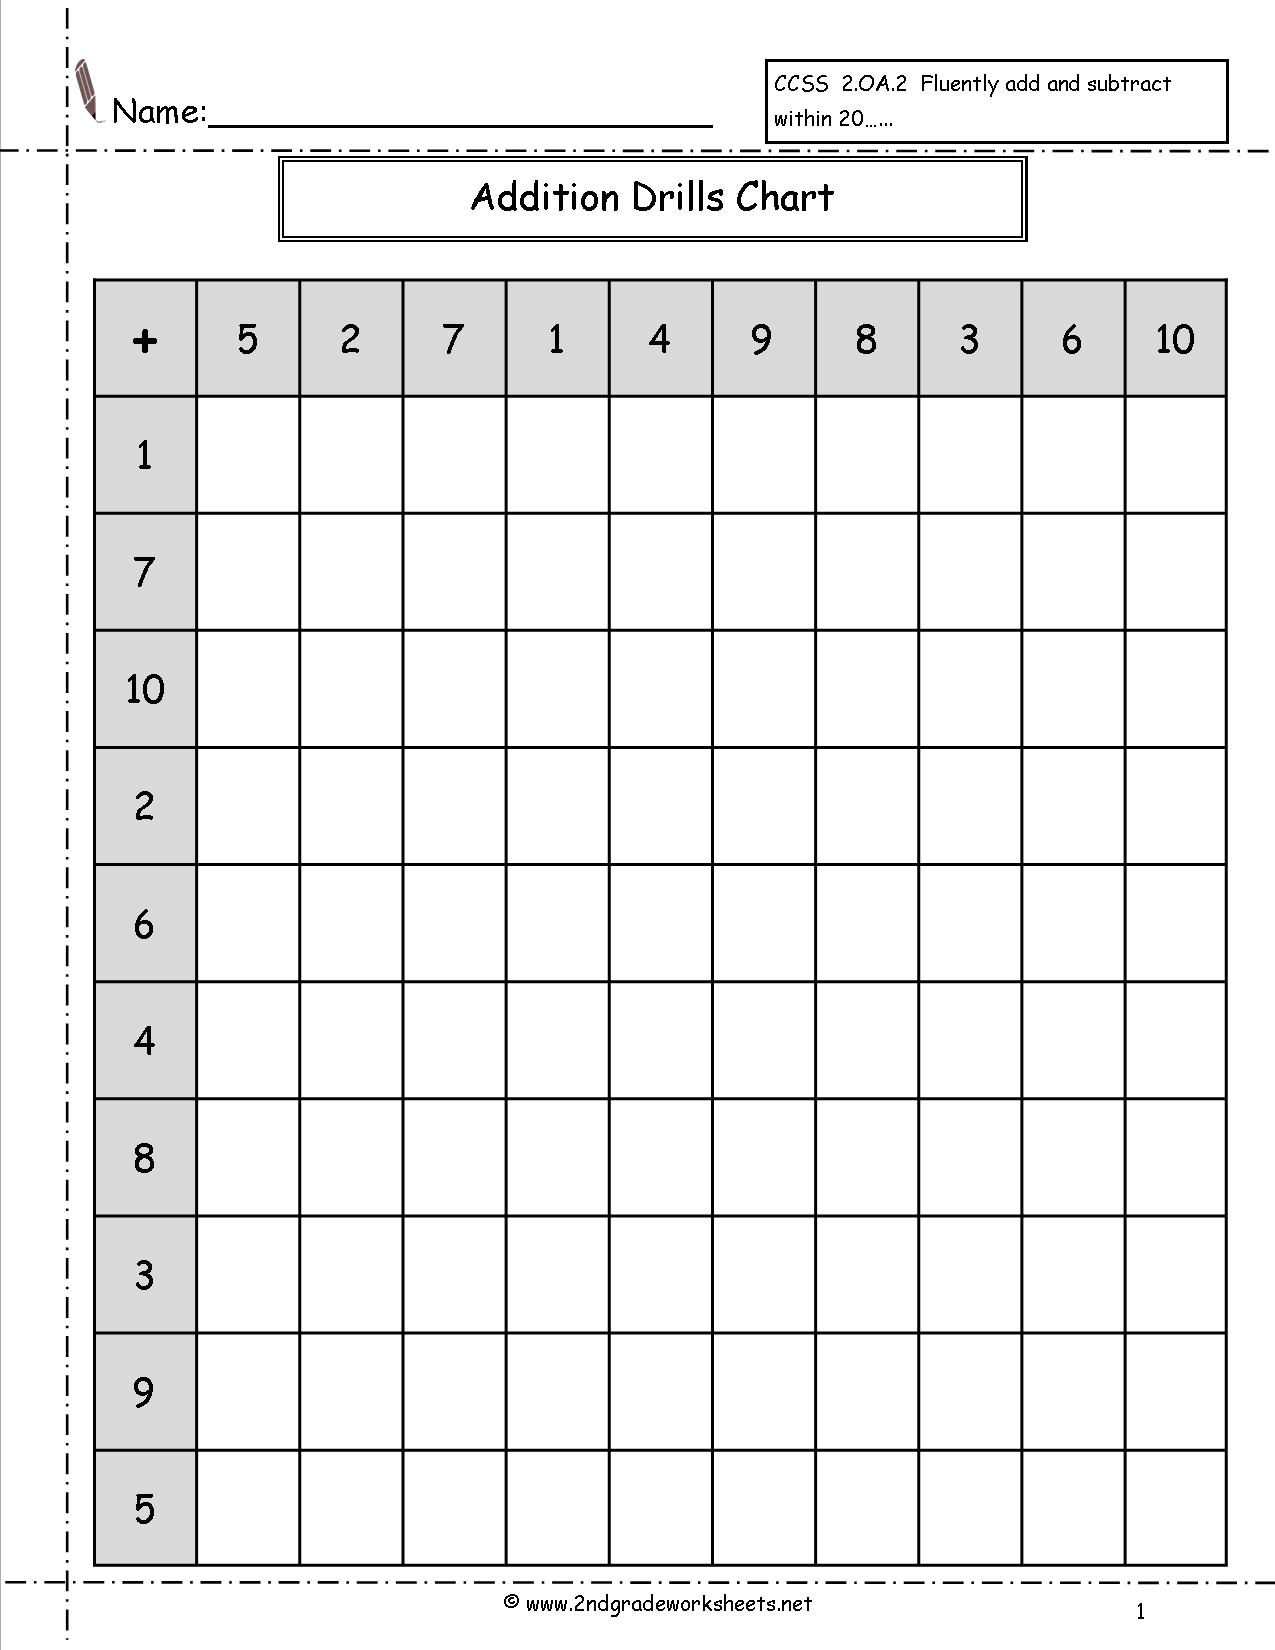 15 Best Images Of Single Addition And Subtraction Worksheets Single Digit Subtraction